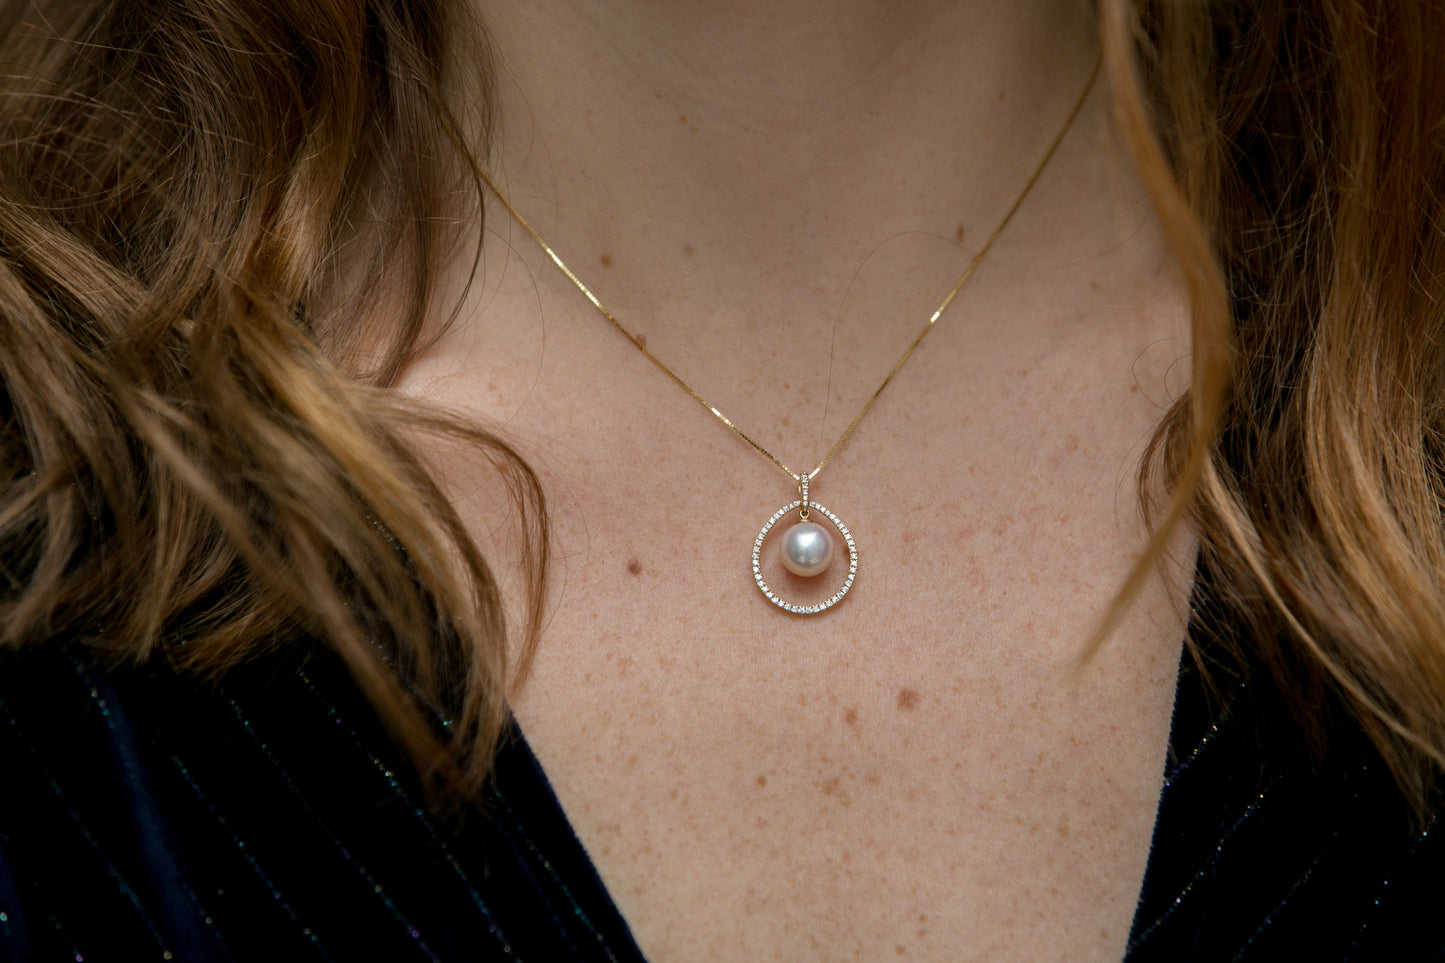 14-16 cultured South Sea Pearl pendant on 14kt gold chain